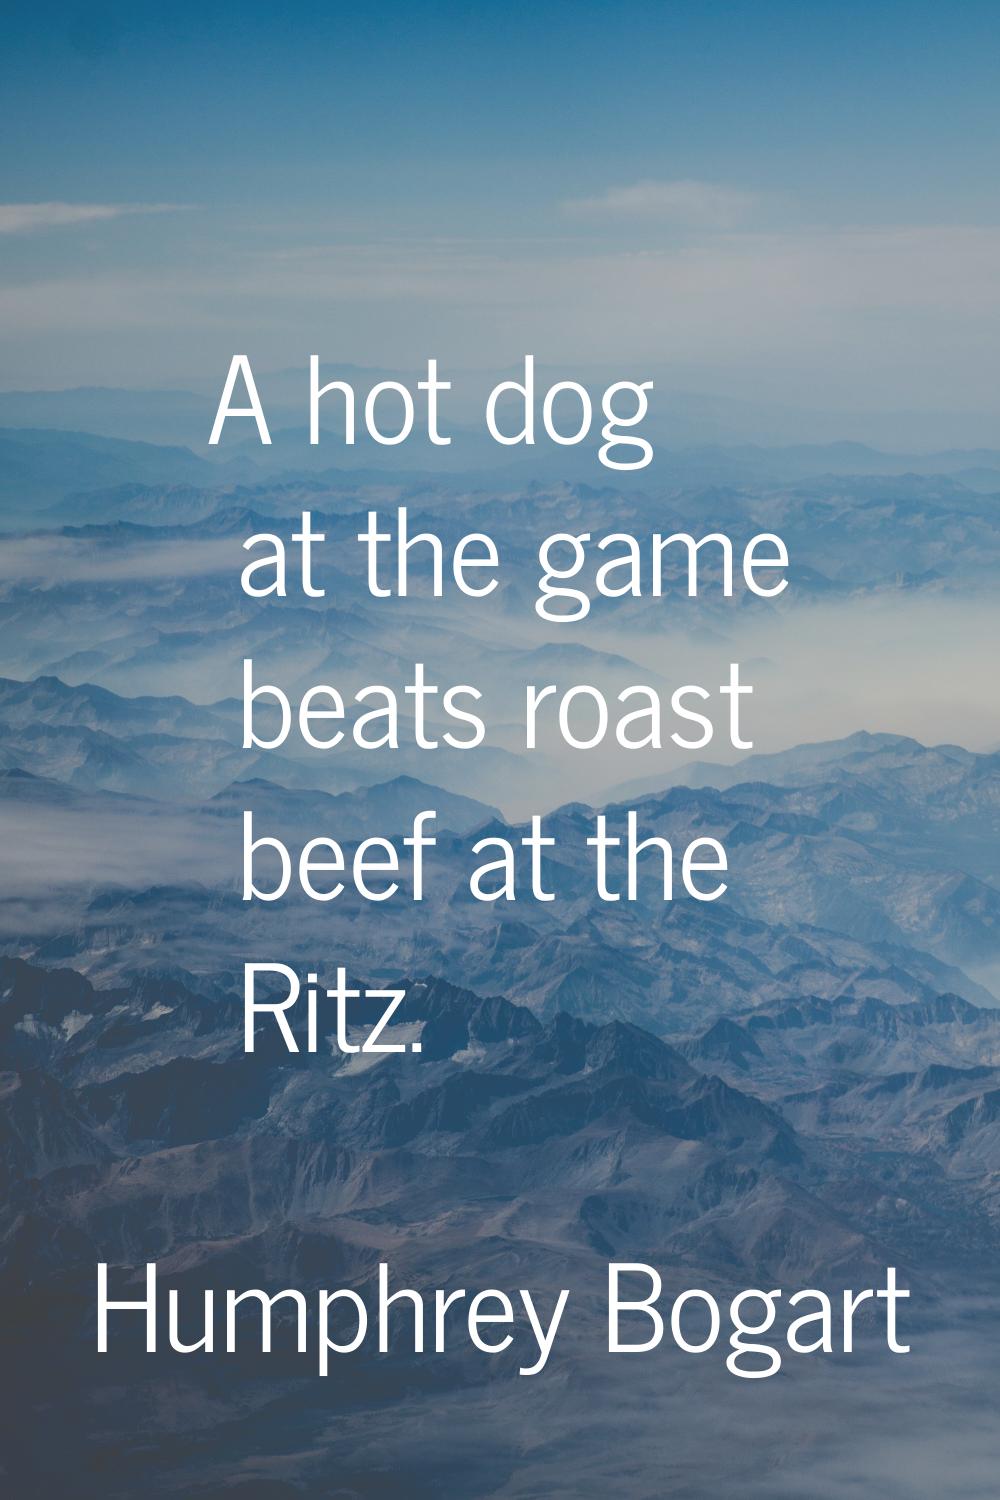 A hot dog at the game beats roast beef at the Ritz.